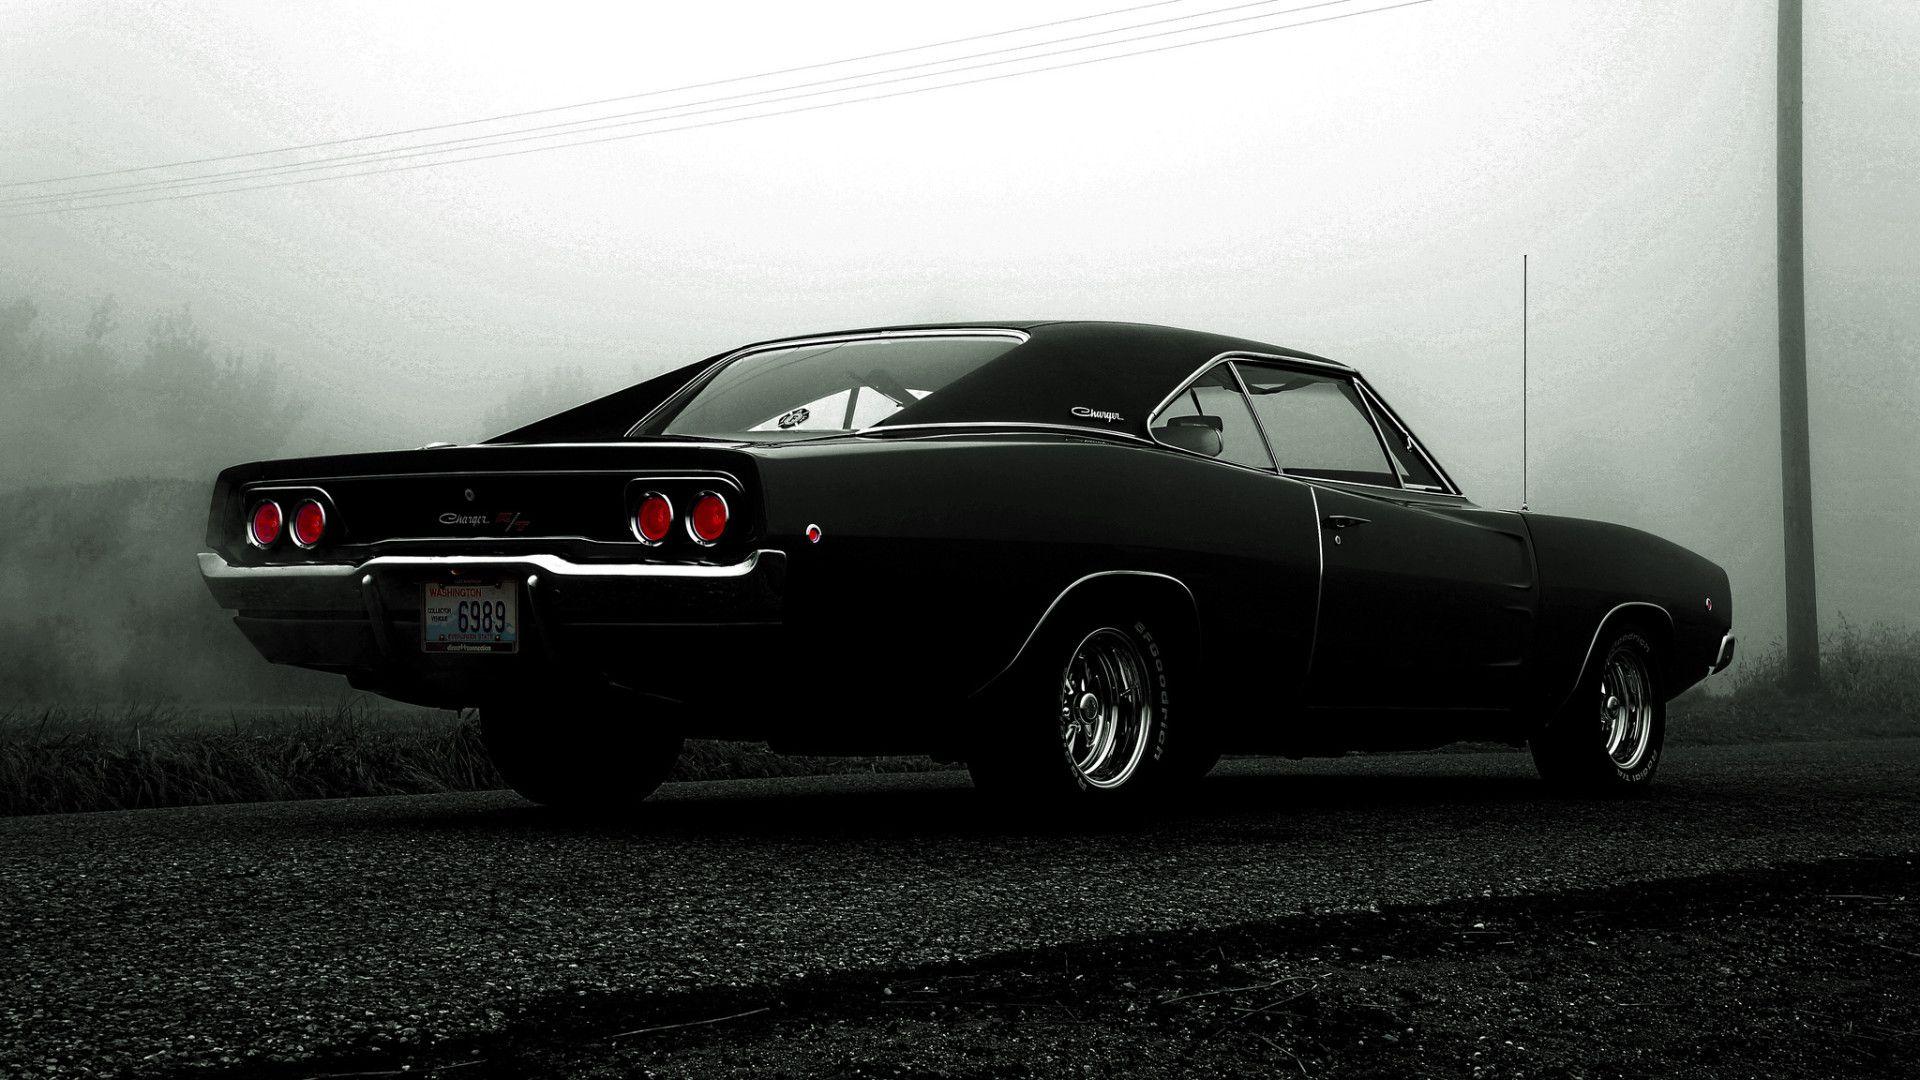 Dodge Charger Wallpaper, 47 Dodge Charger Image and Wallpaper